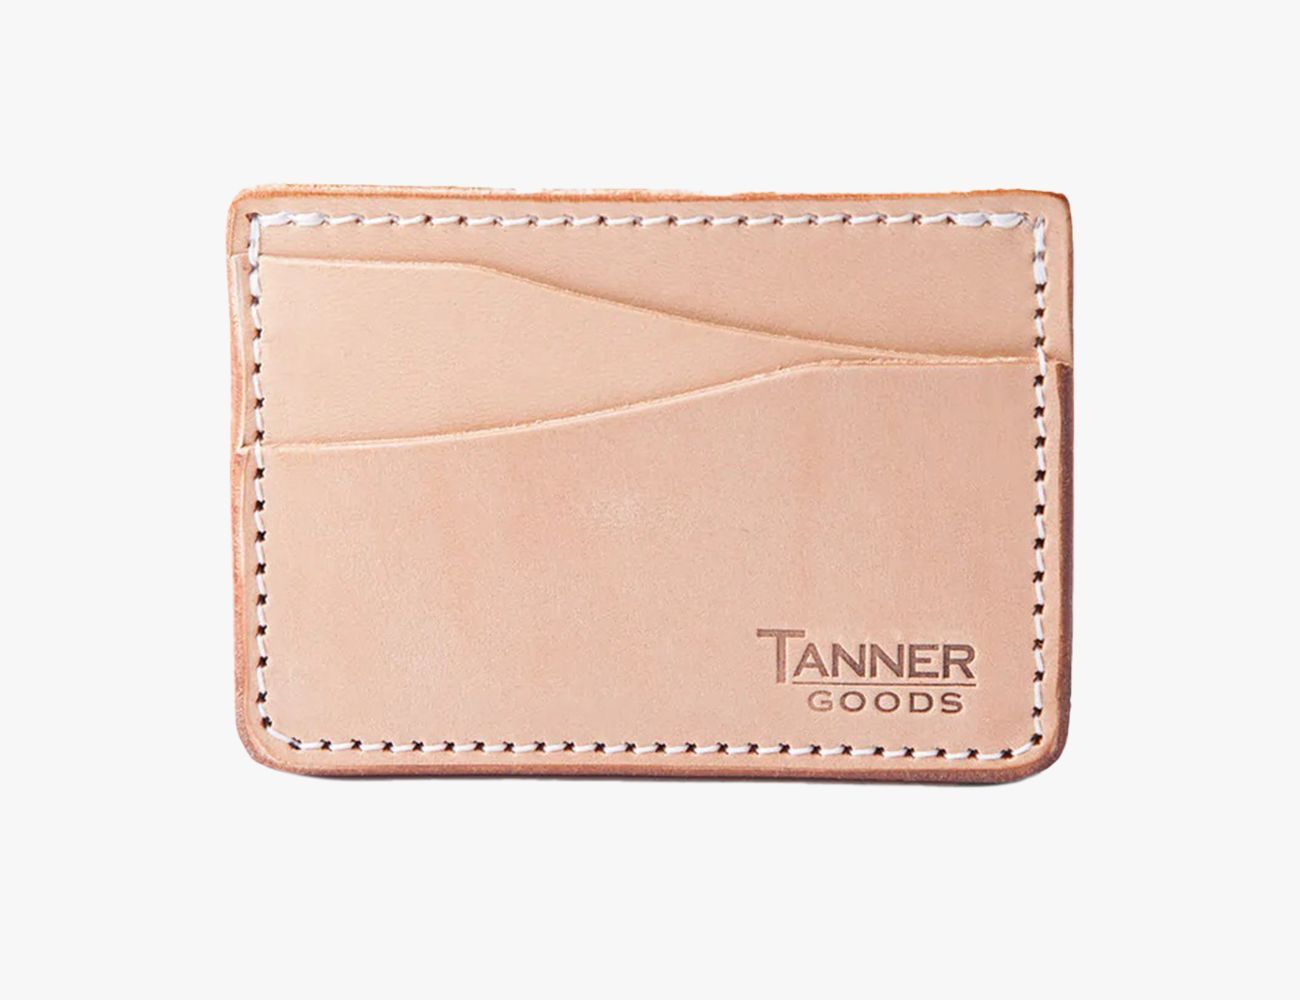 The Best Card Holders Do More With Less